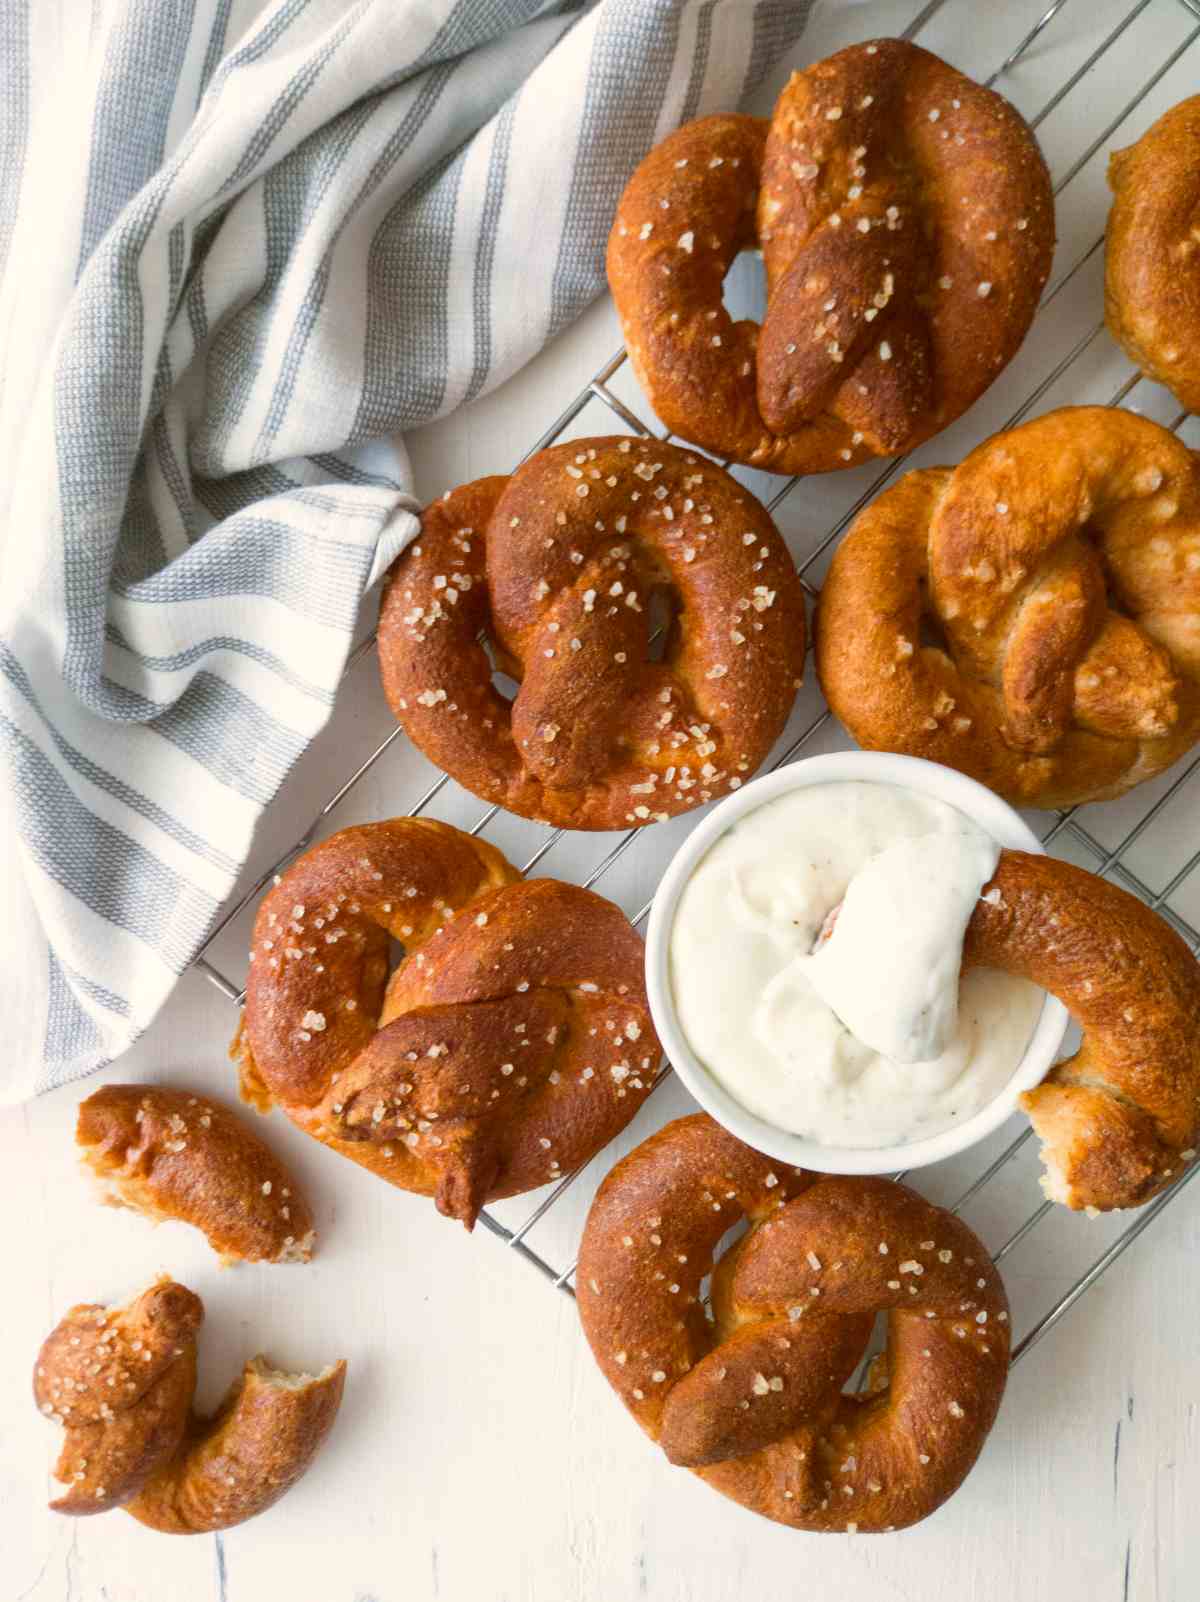 Gluten-free sourdough soft pretzels on a cooling rack with sauce and a towel in the background.